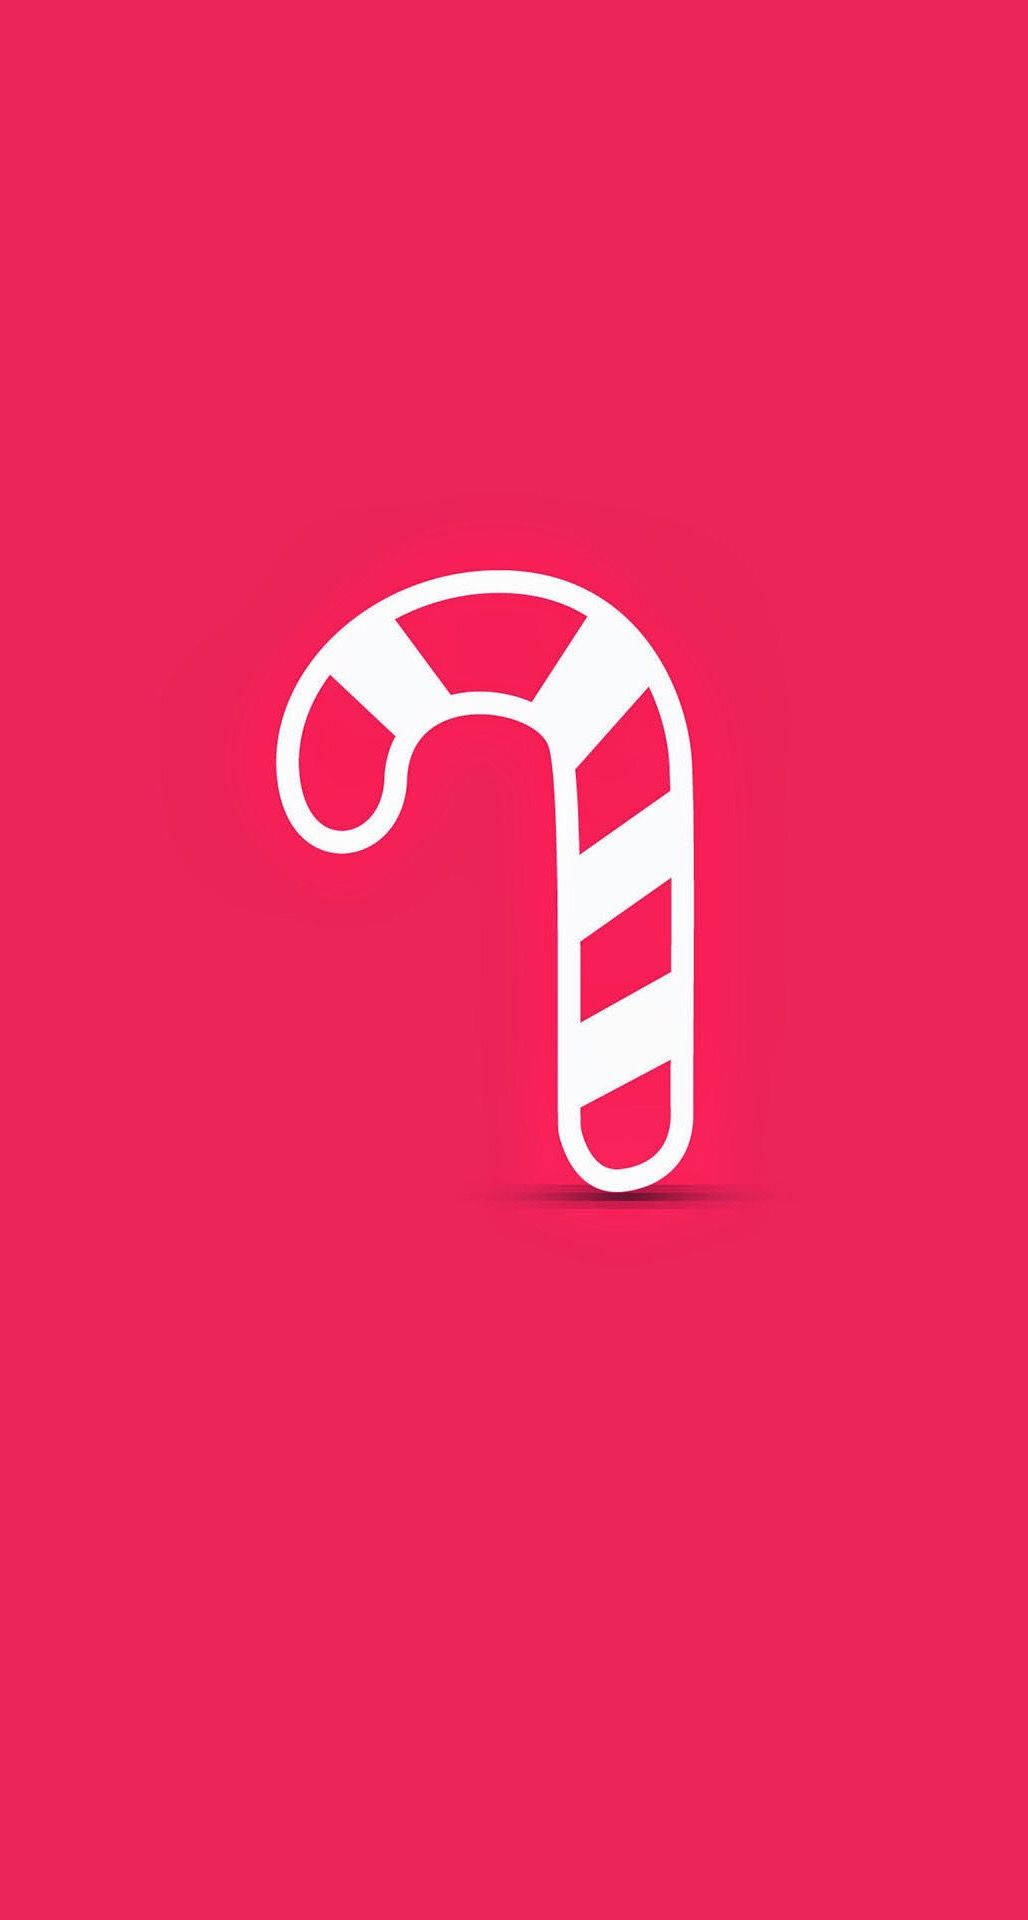 Candy Cane 1028X1920 Wallpaper and Background Image